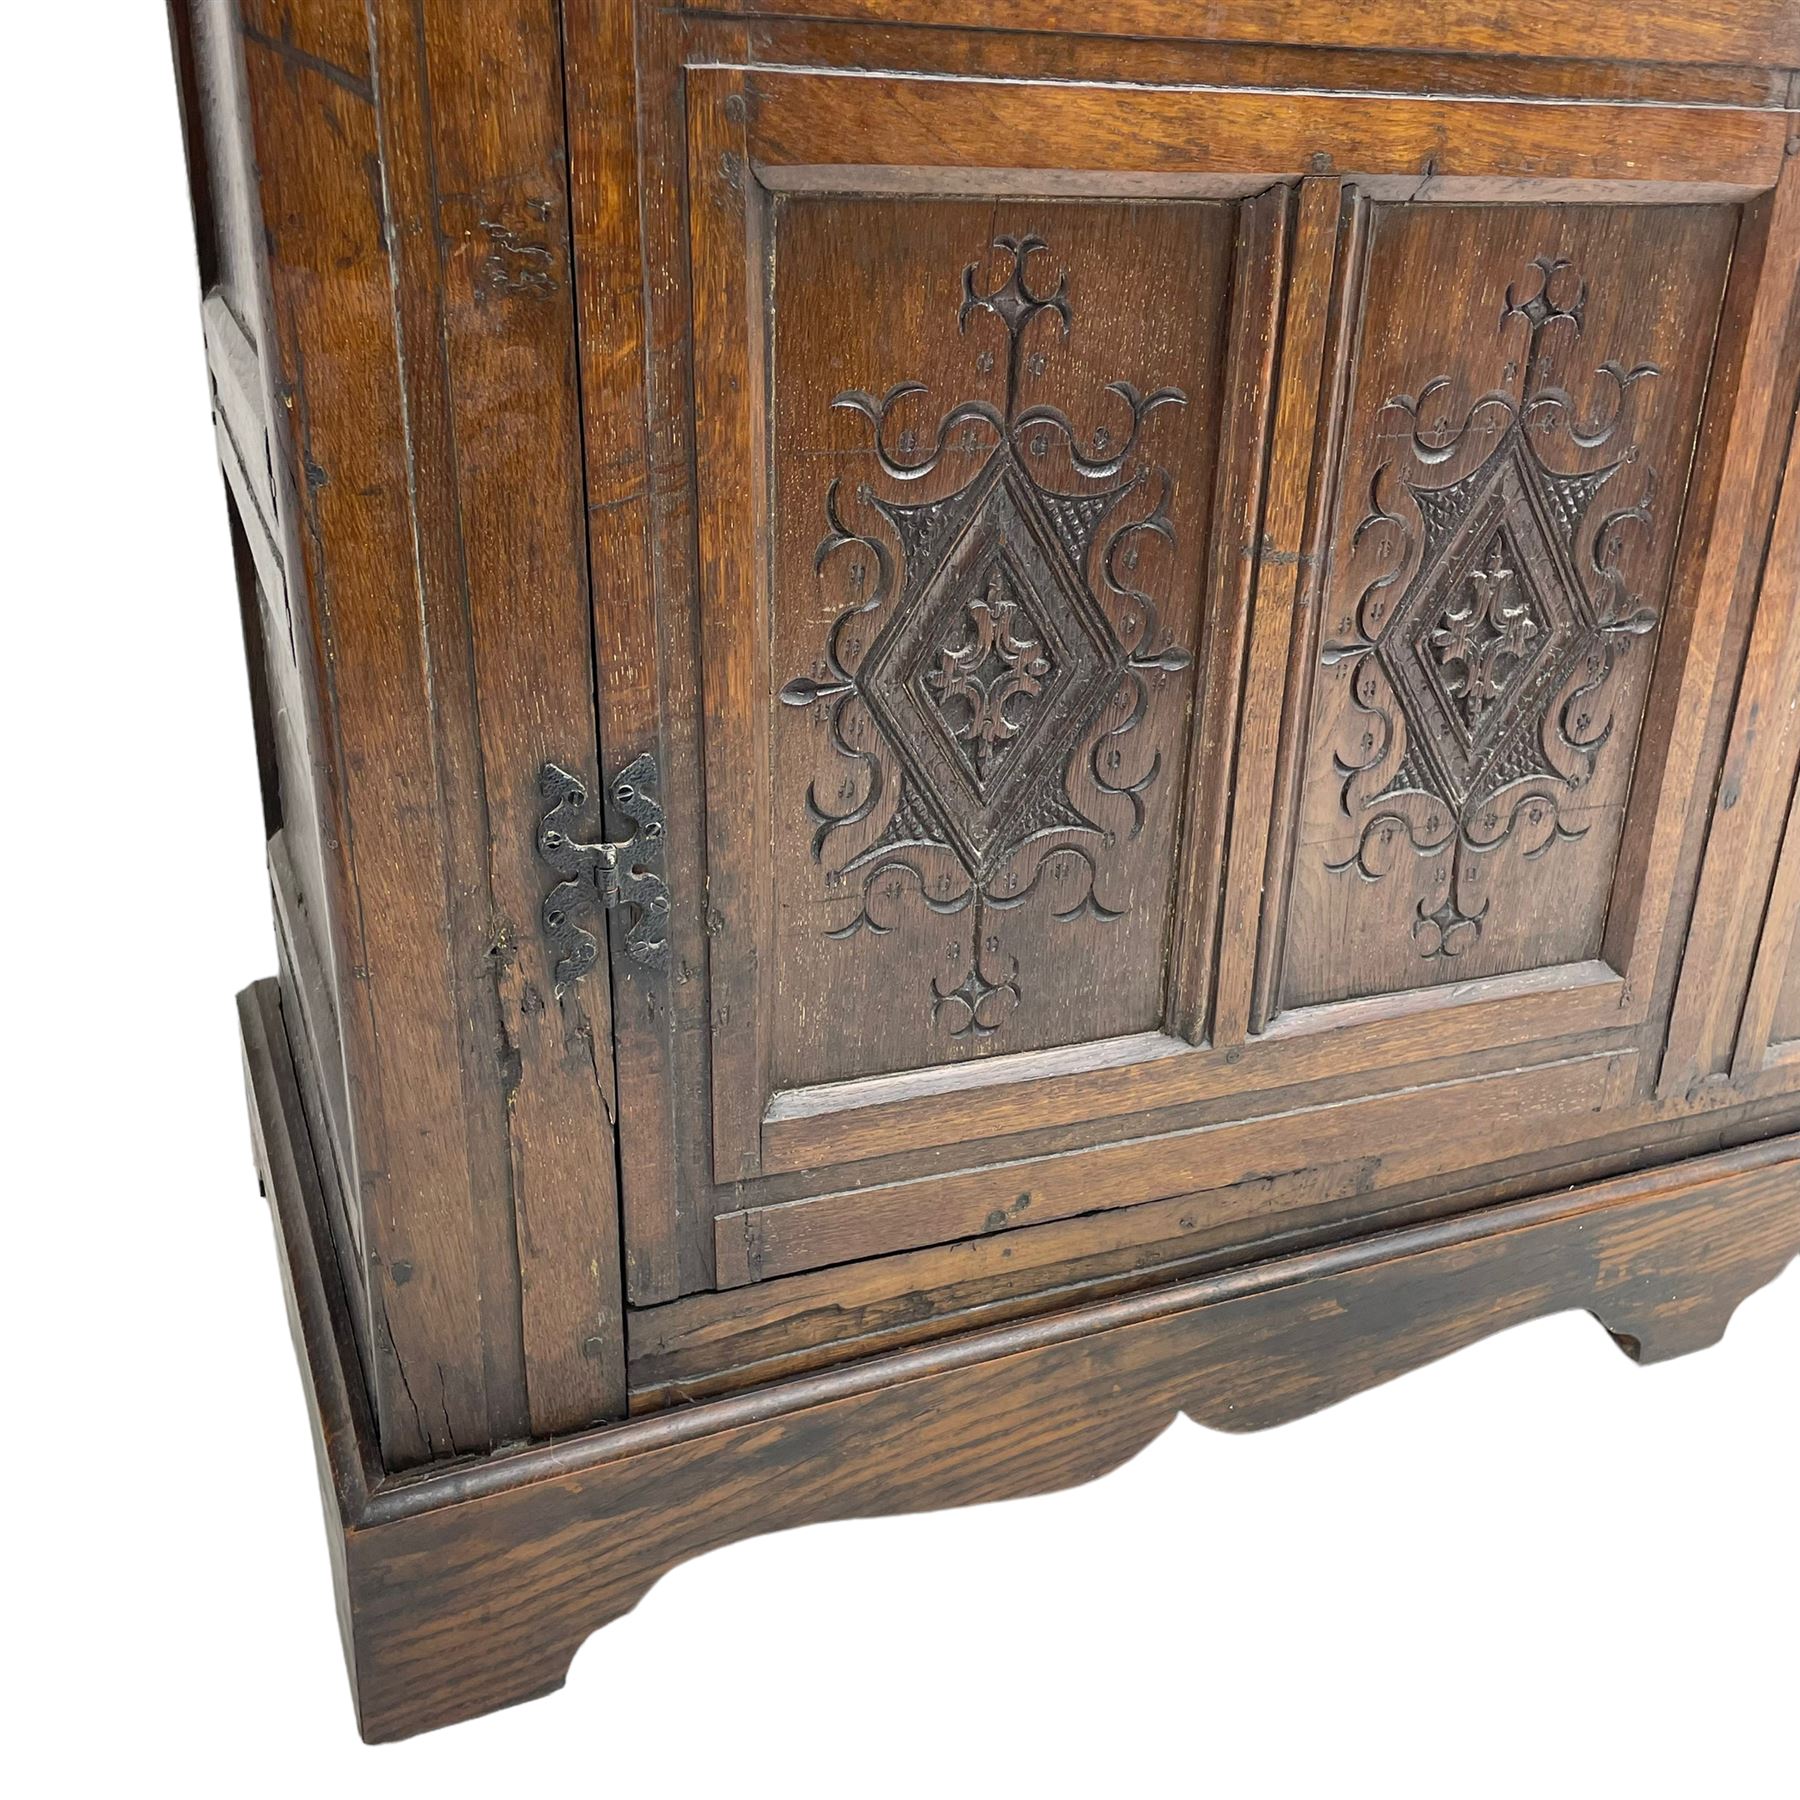 Large 18th century and later oak livery cupboard - Image 7 of 10